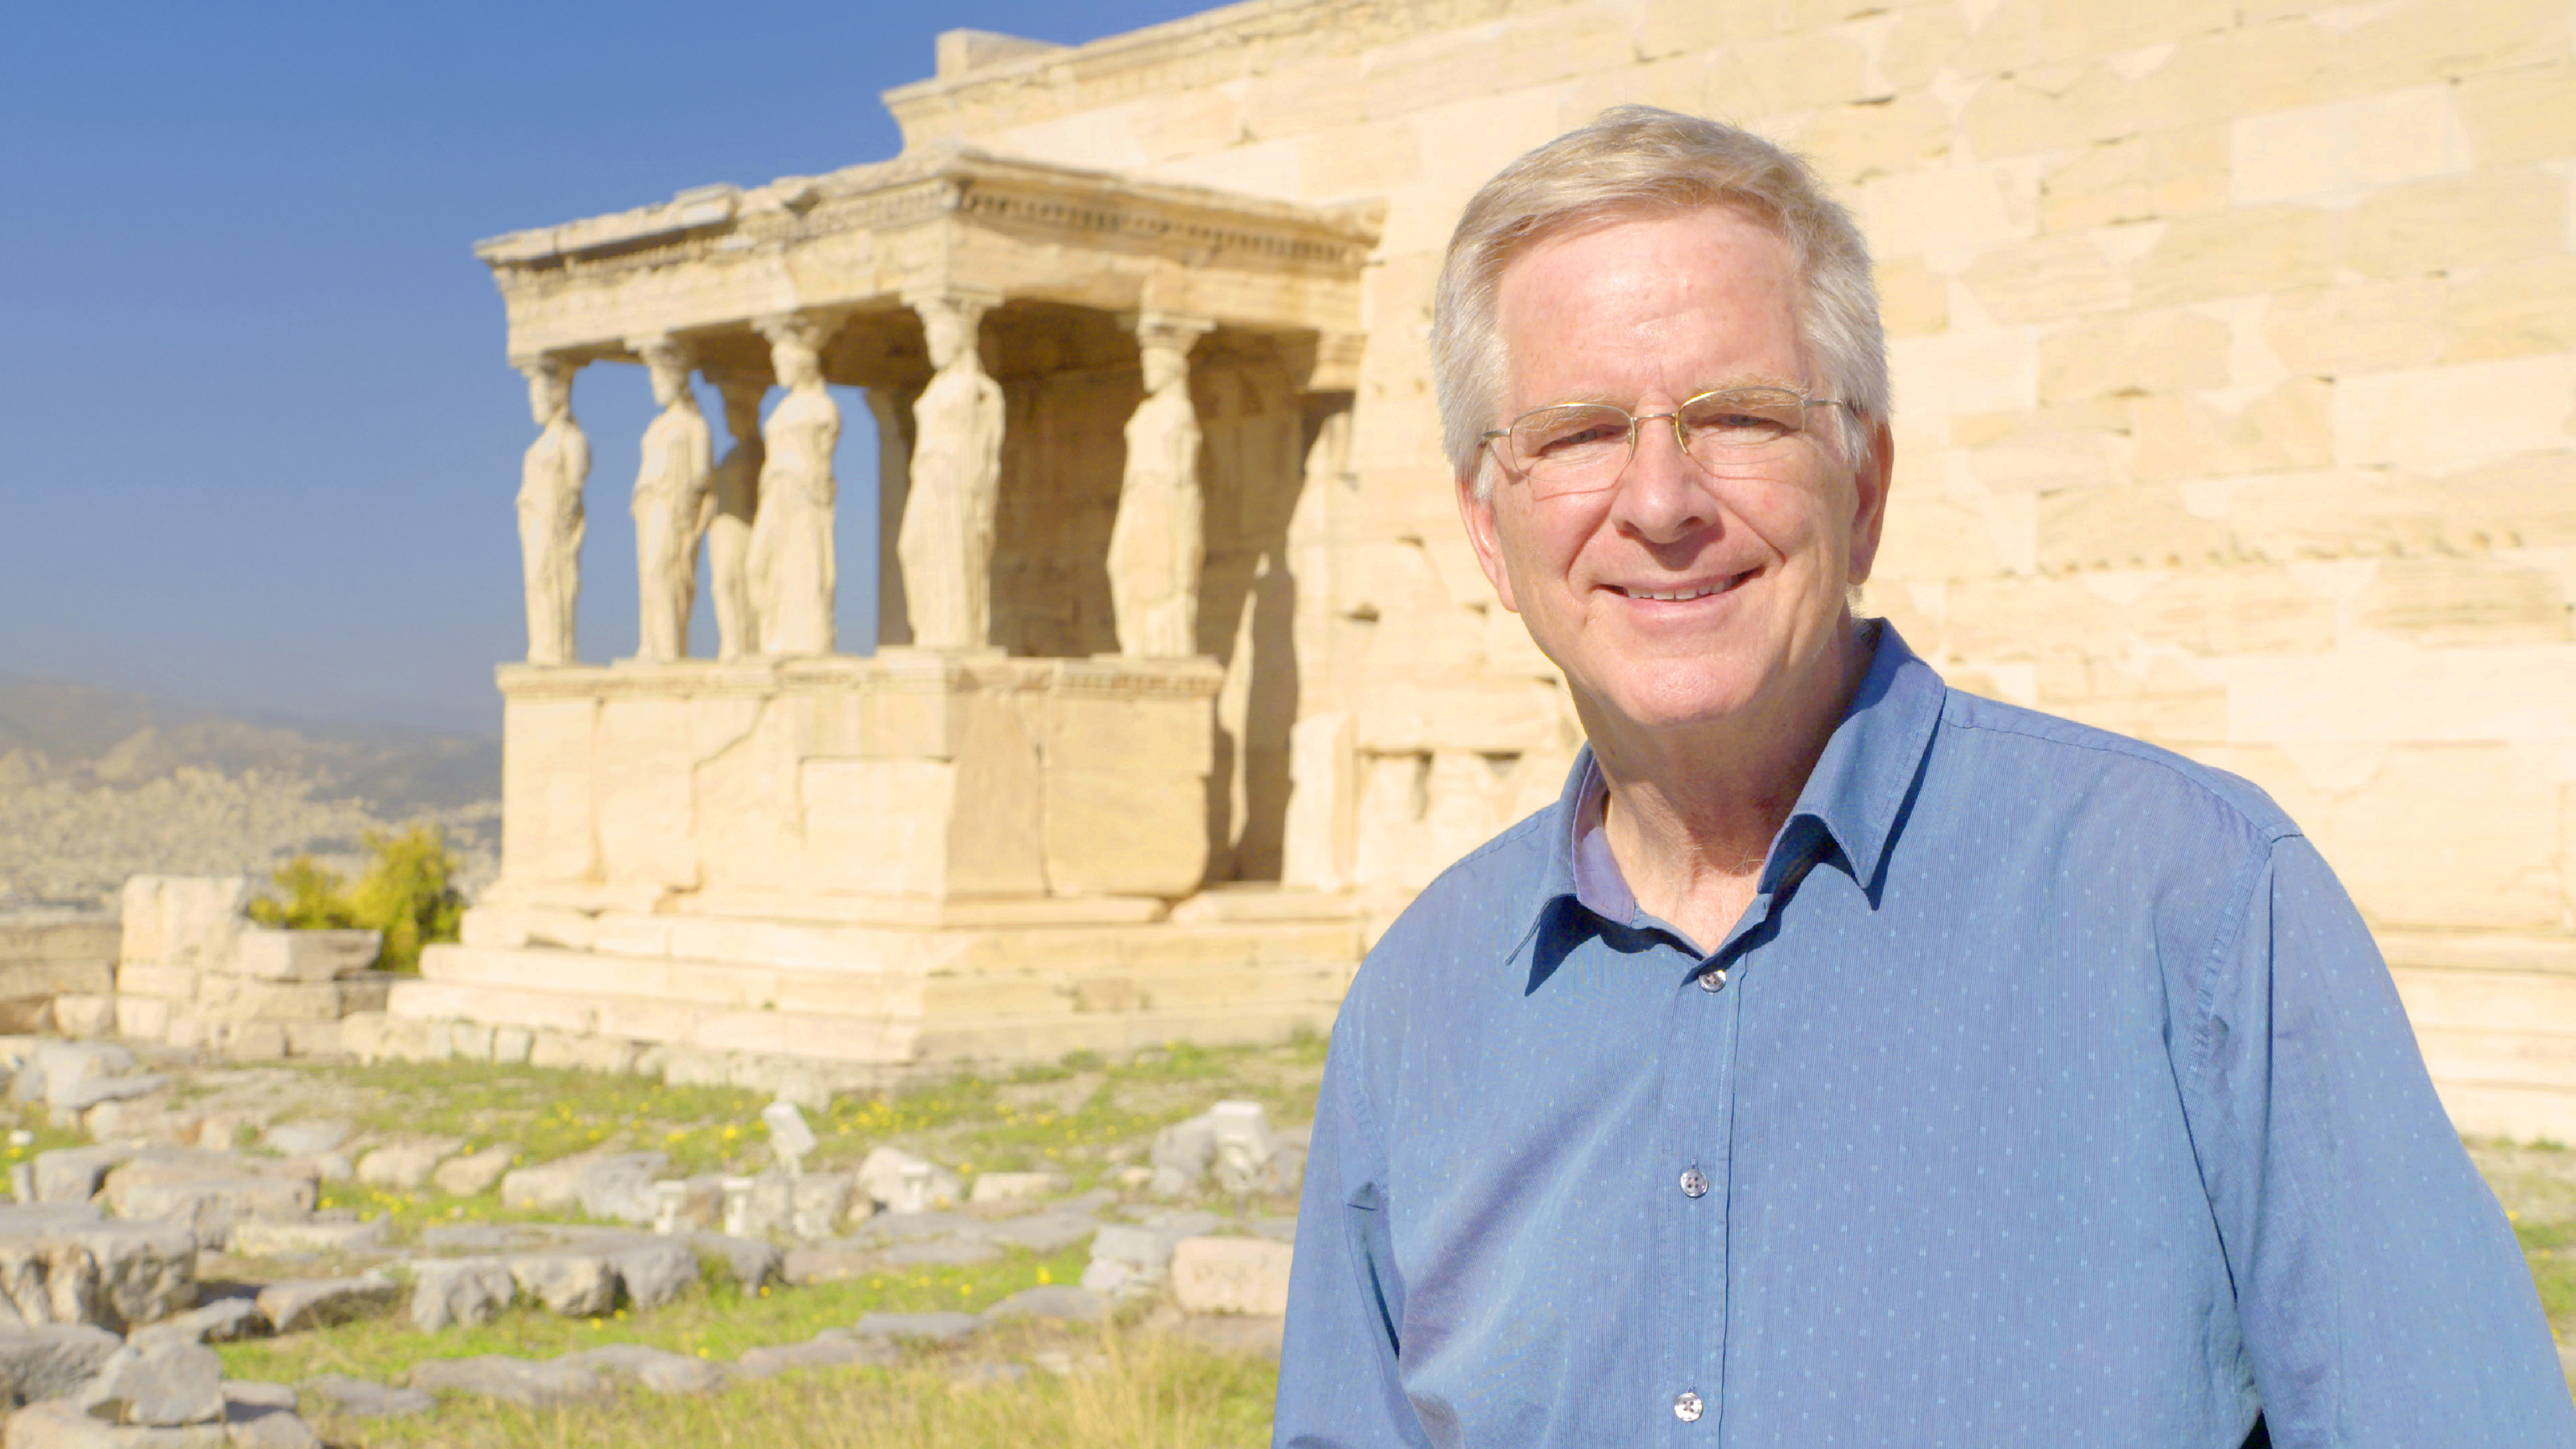 Rick Steves and the Caryatids of Erechtheion, at the Acropolis in Athens, Greece.